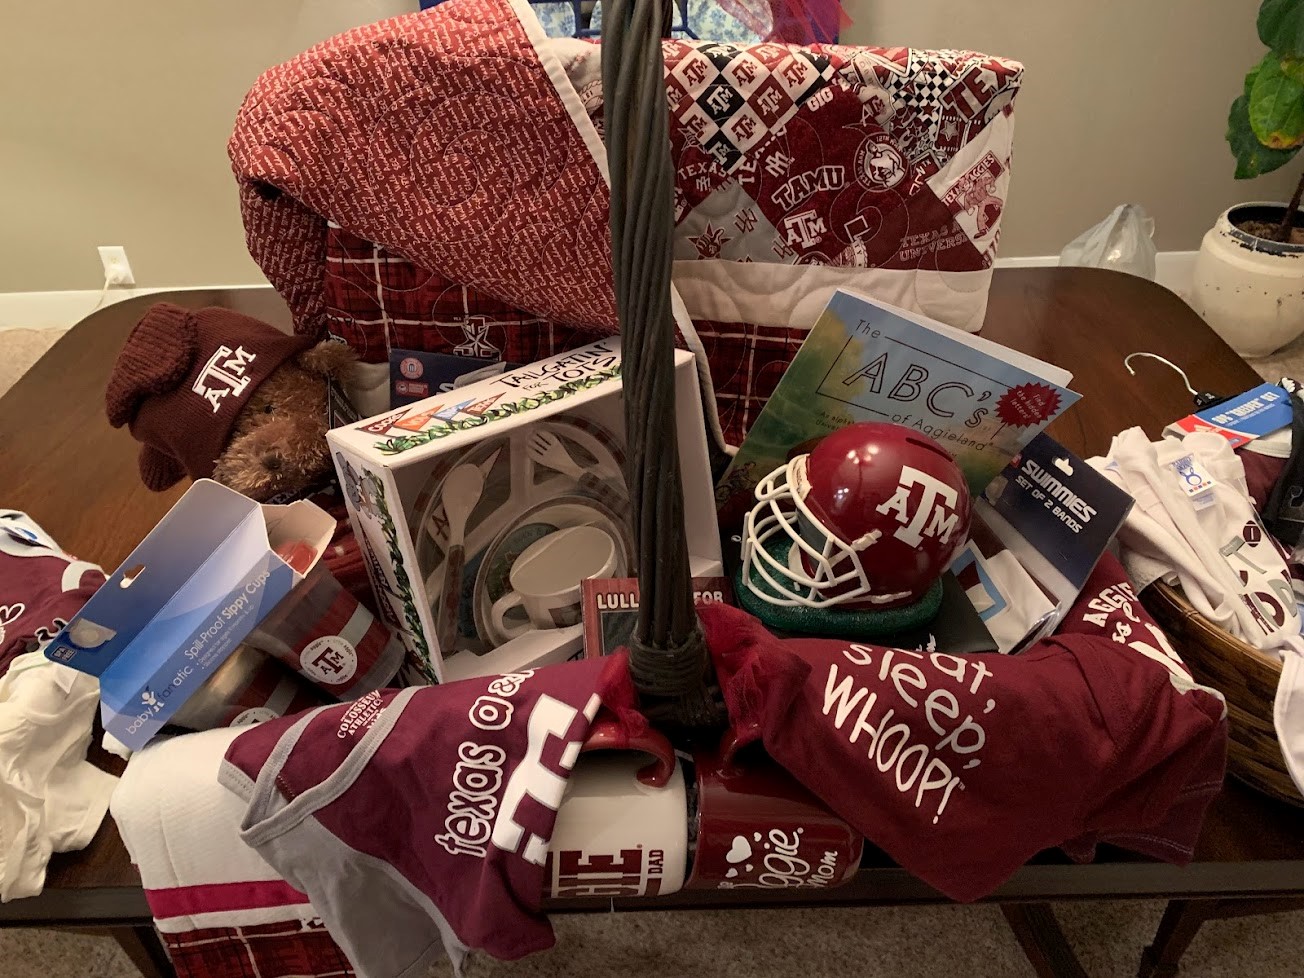 Aggie Baby Basket raffle Ticket - 1 for $5